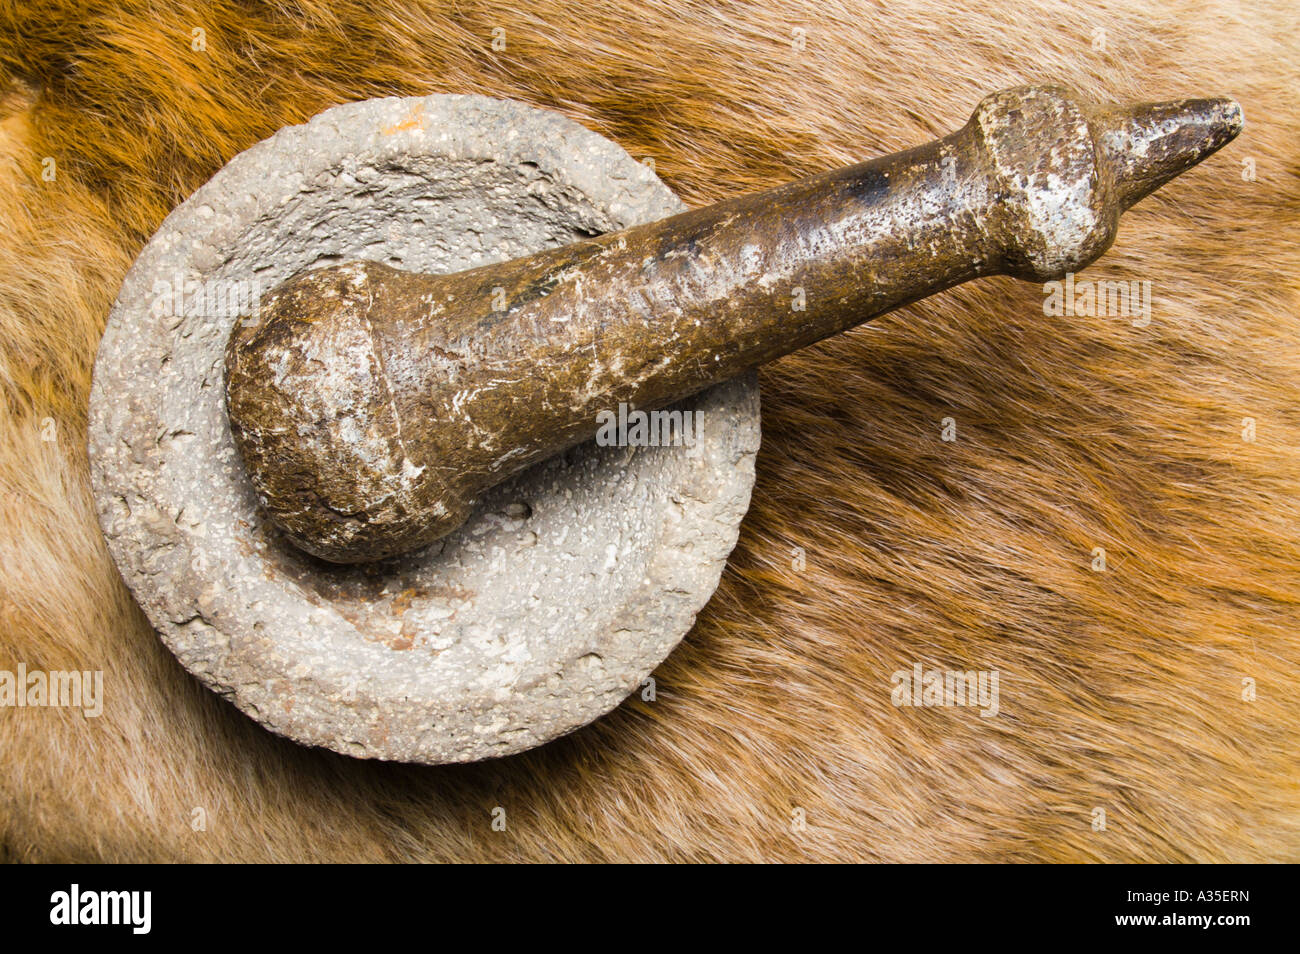 pacific northwest native american mortar and pestle Stock Photo